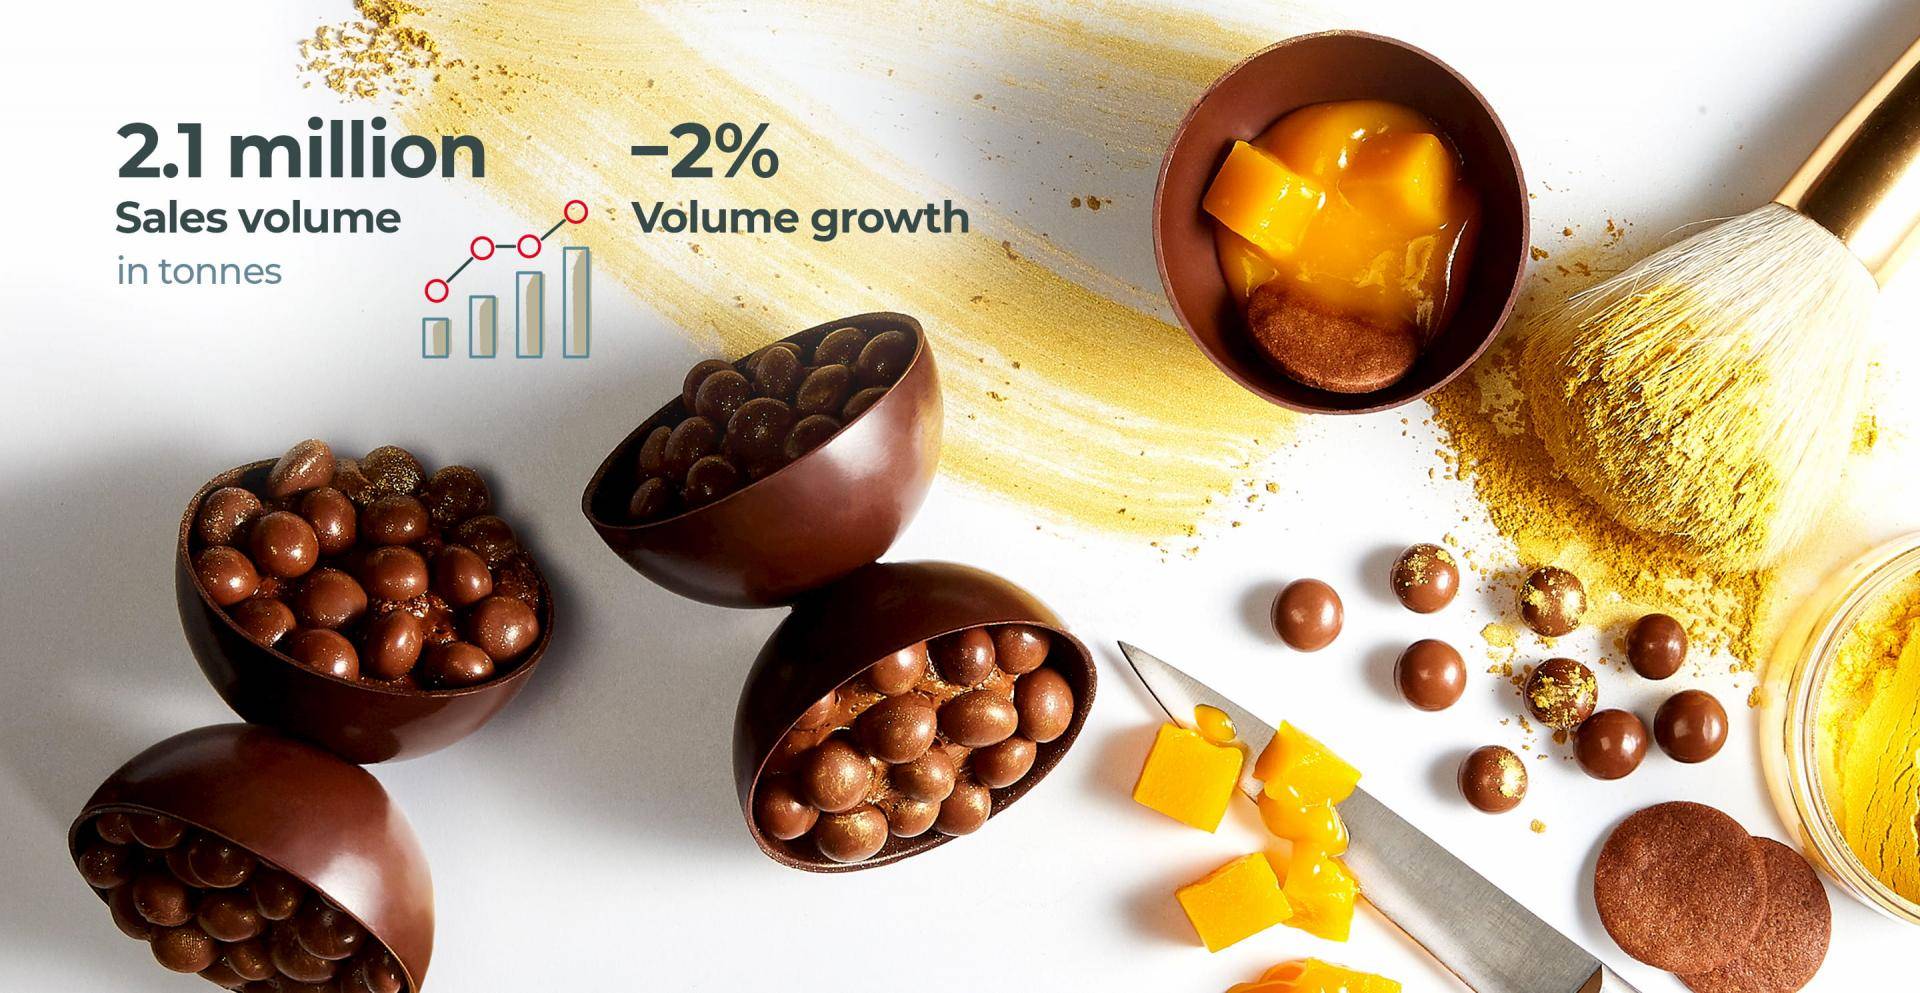 Sales Volume Fiscal Year 2019/20 Barry Callebaut